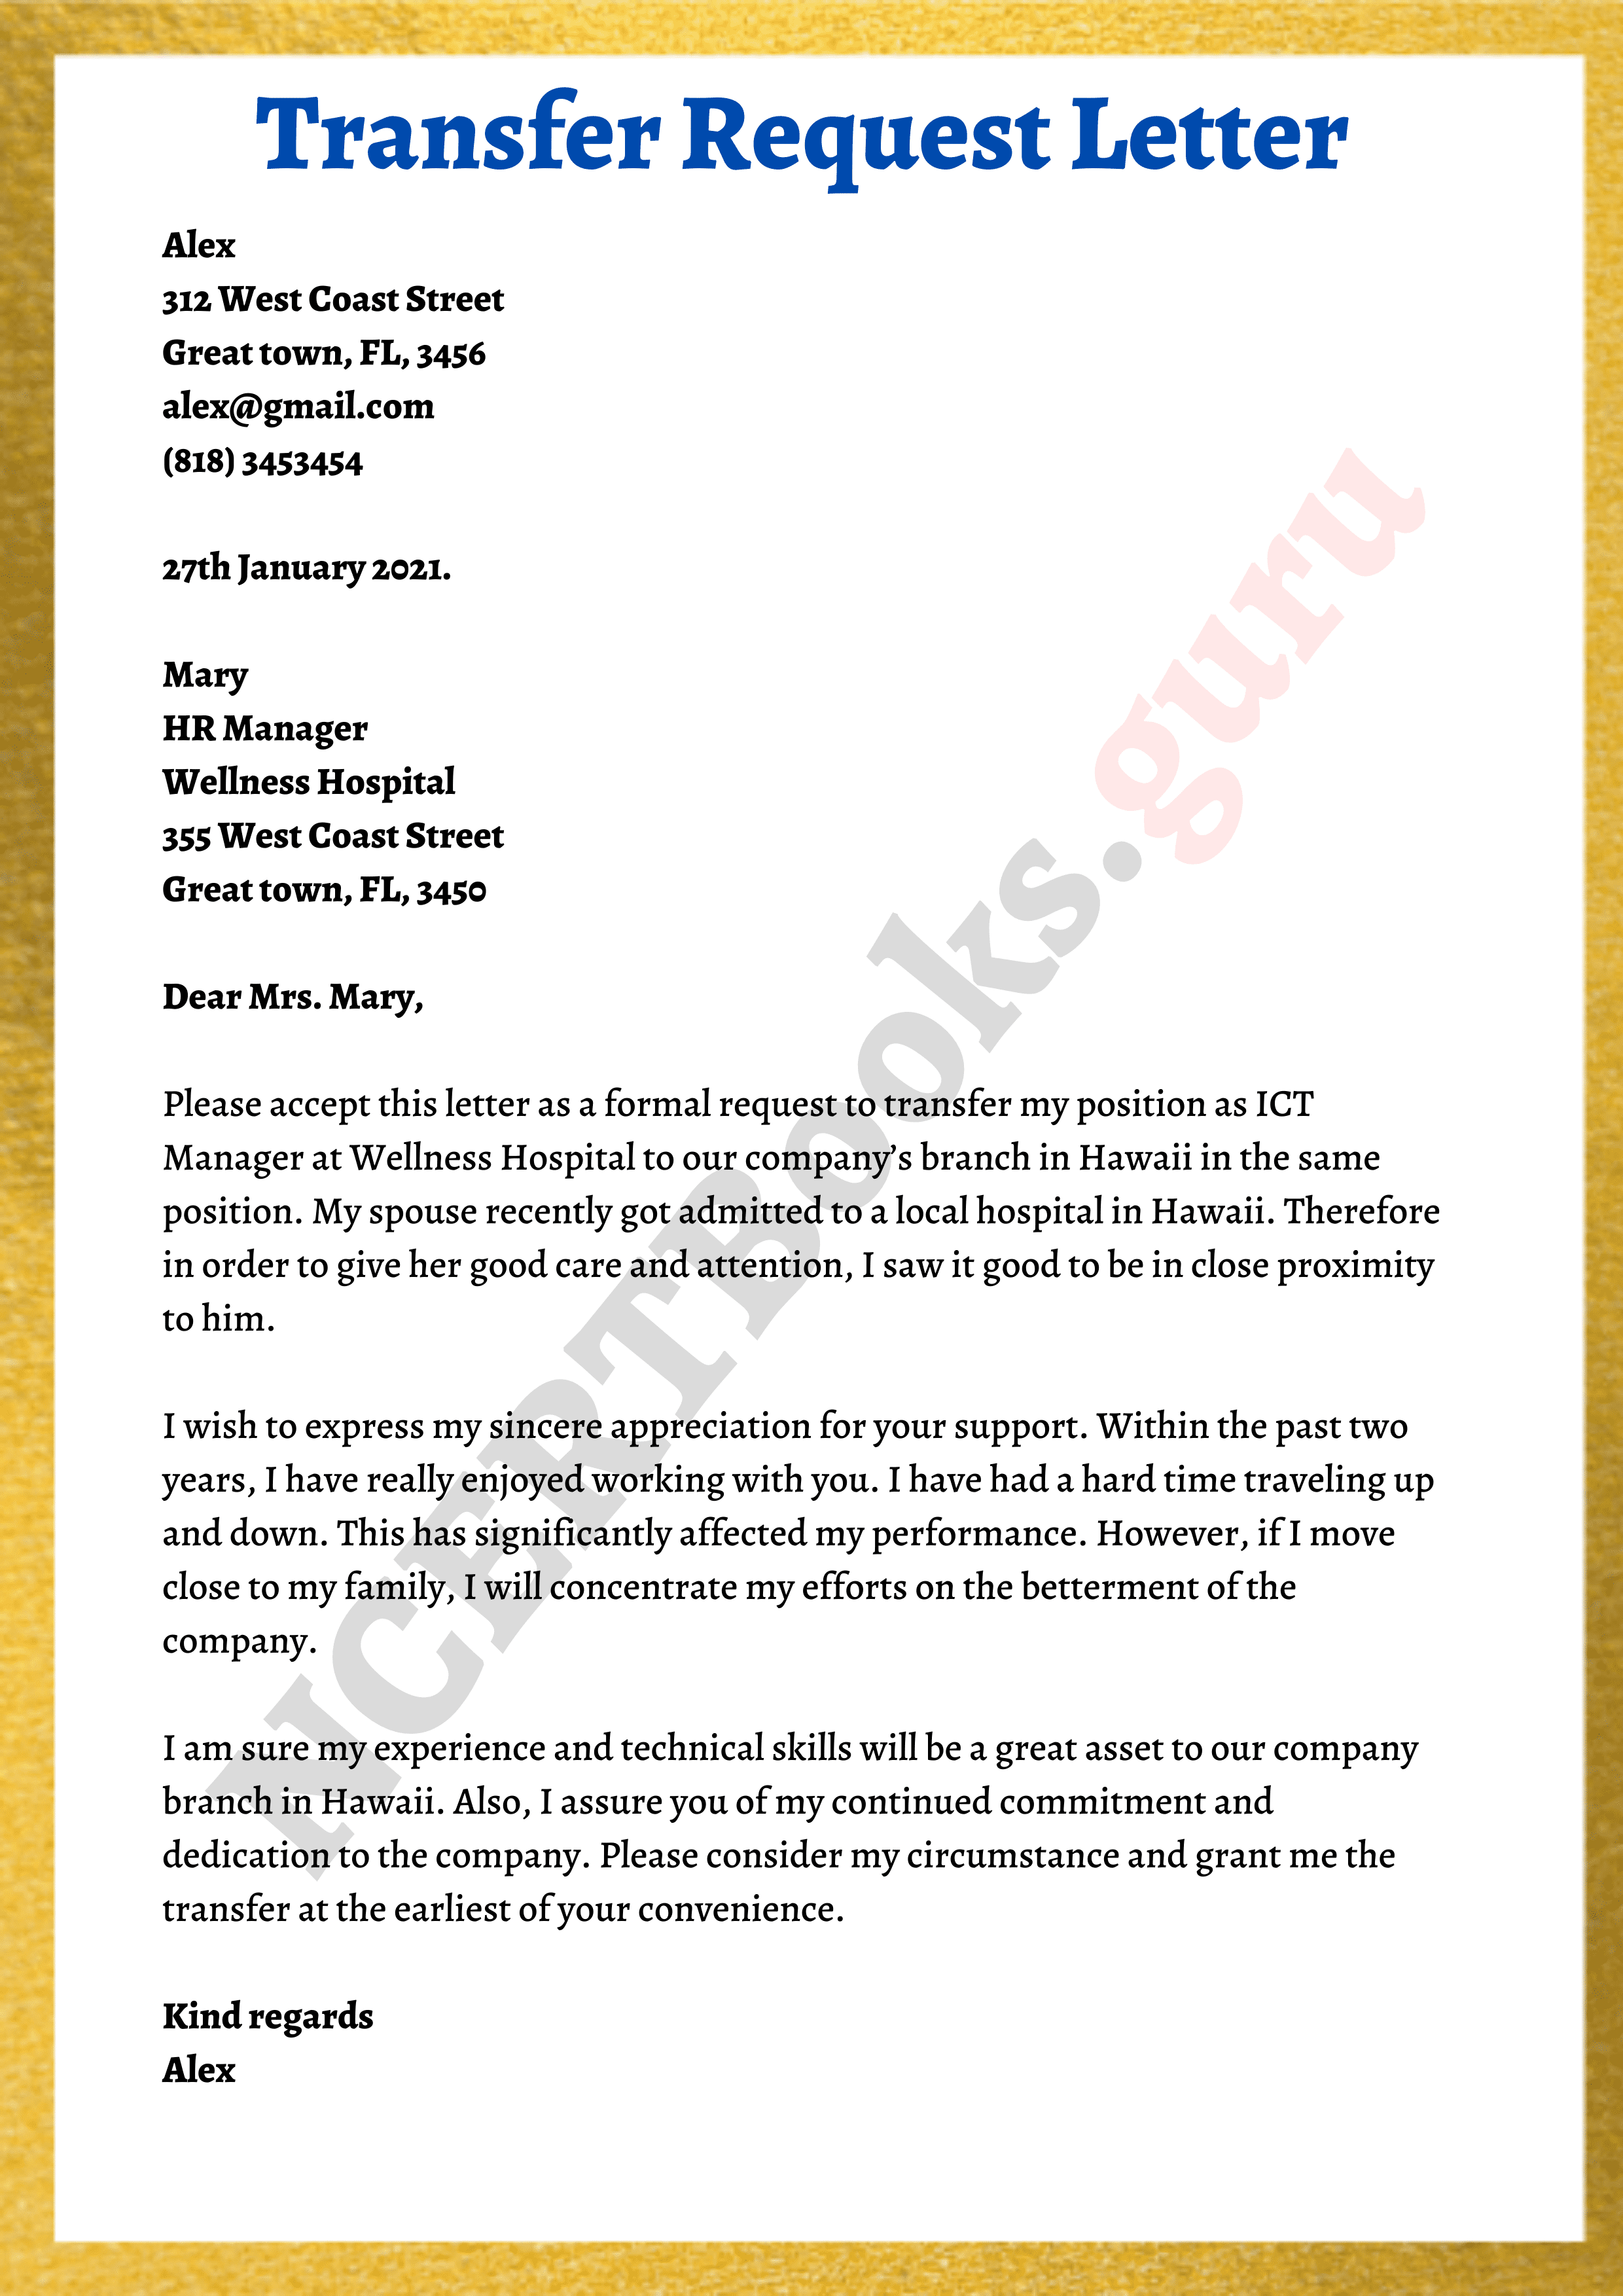 request letter transfer of assignment